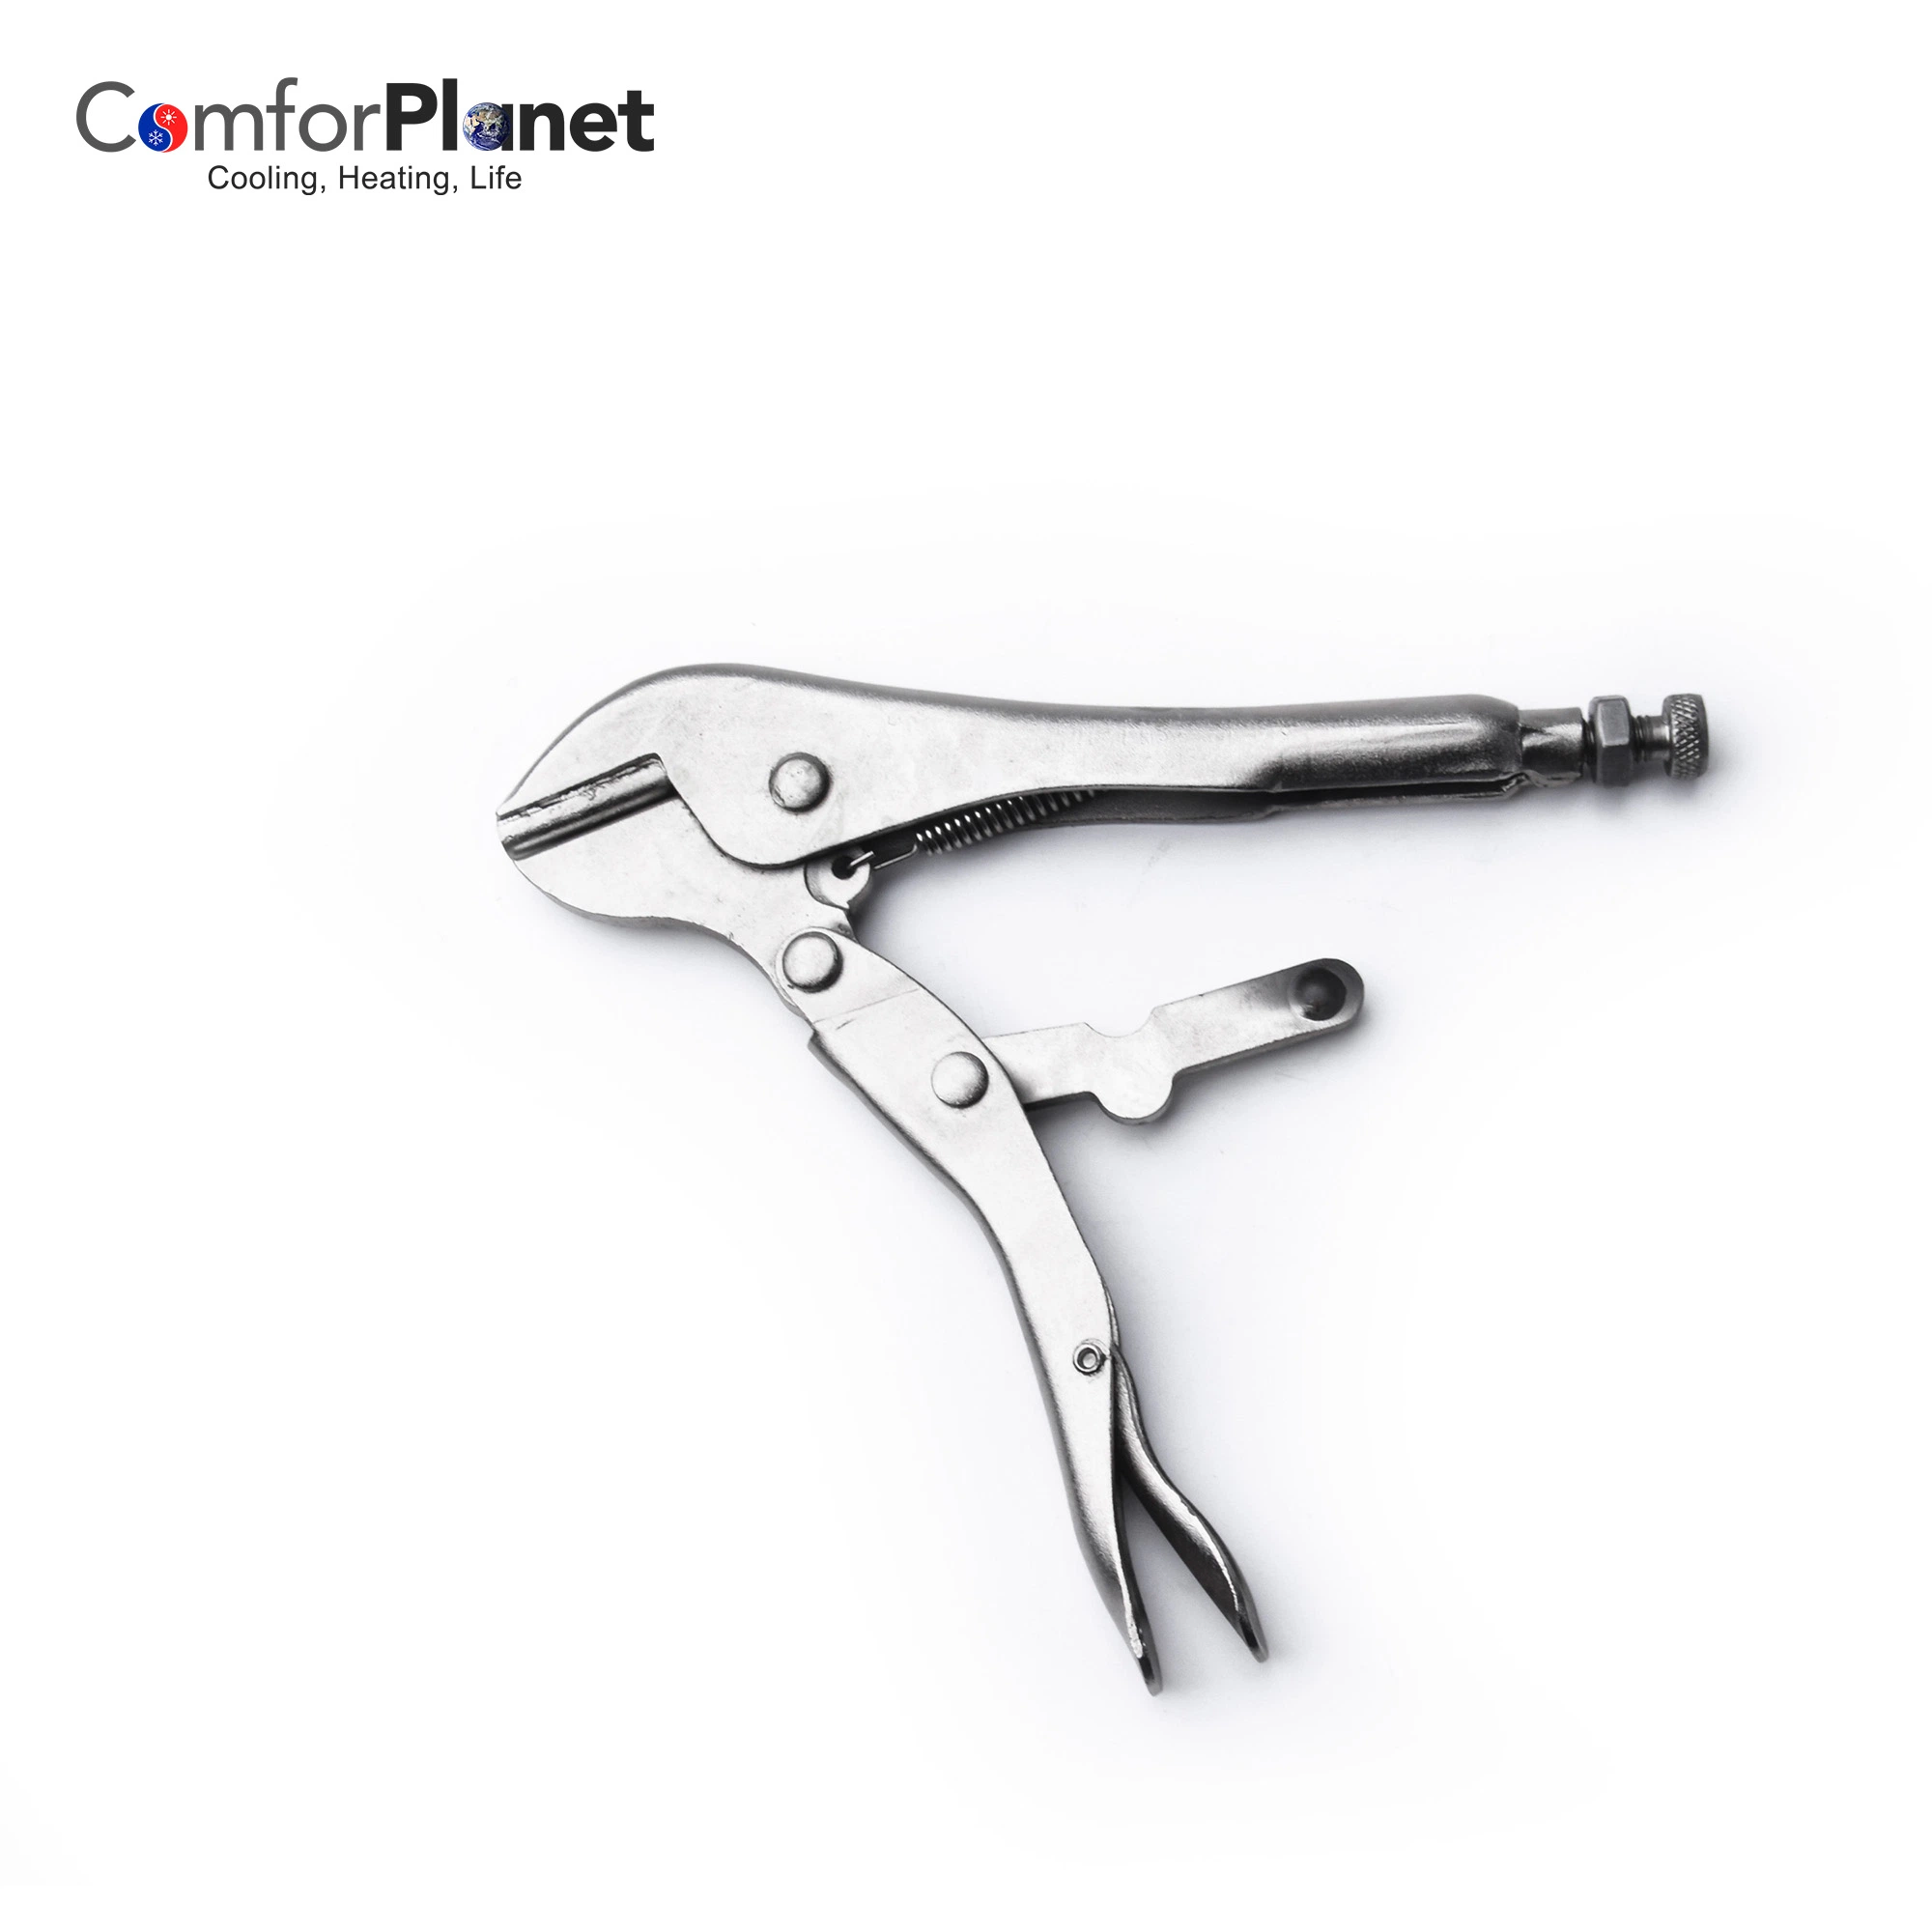 Factory Price CT-201 Pinch-off Plier for Copper Tube up to 5/16" O. D. HVAC Manufacturer